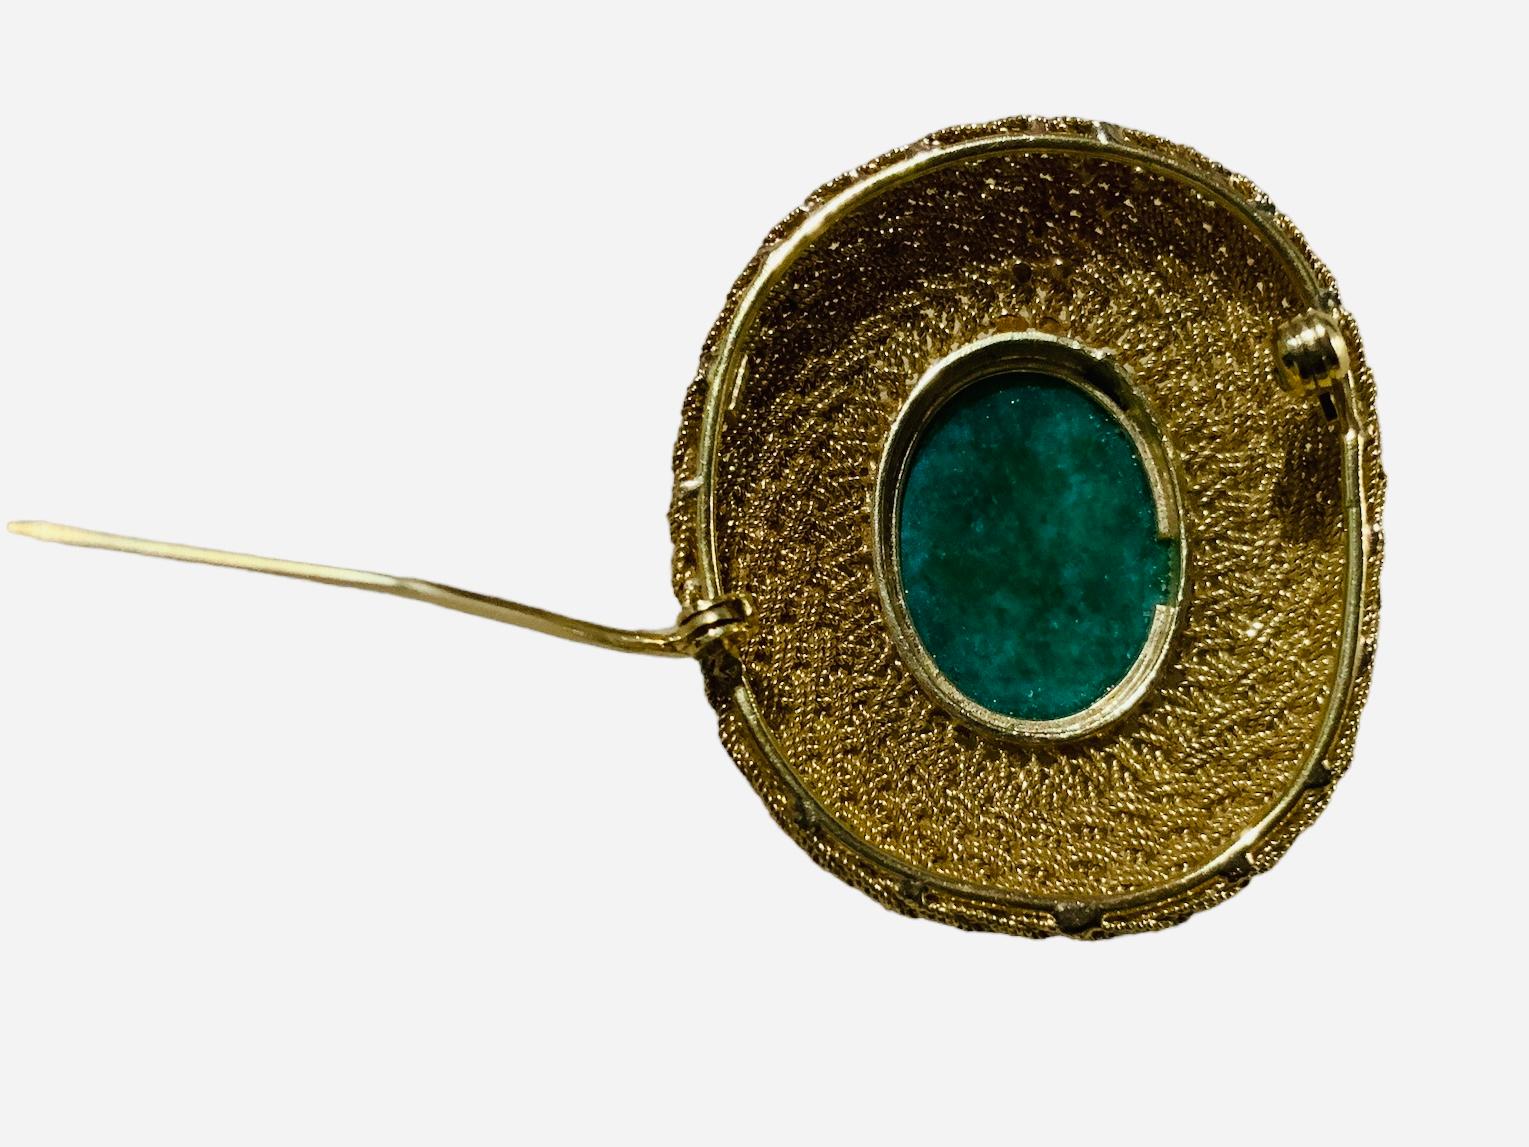 This is an 18K yellow gold Jade brooch. It depicts an oval shaped cabochon jade mounted in bezel setting gold brooch and adorned with gold braided thin ropes. It closes with a C-clasp in its back. It is hallmarked 18k gold in the back.